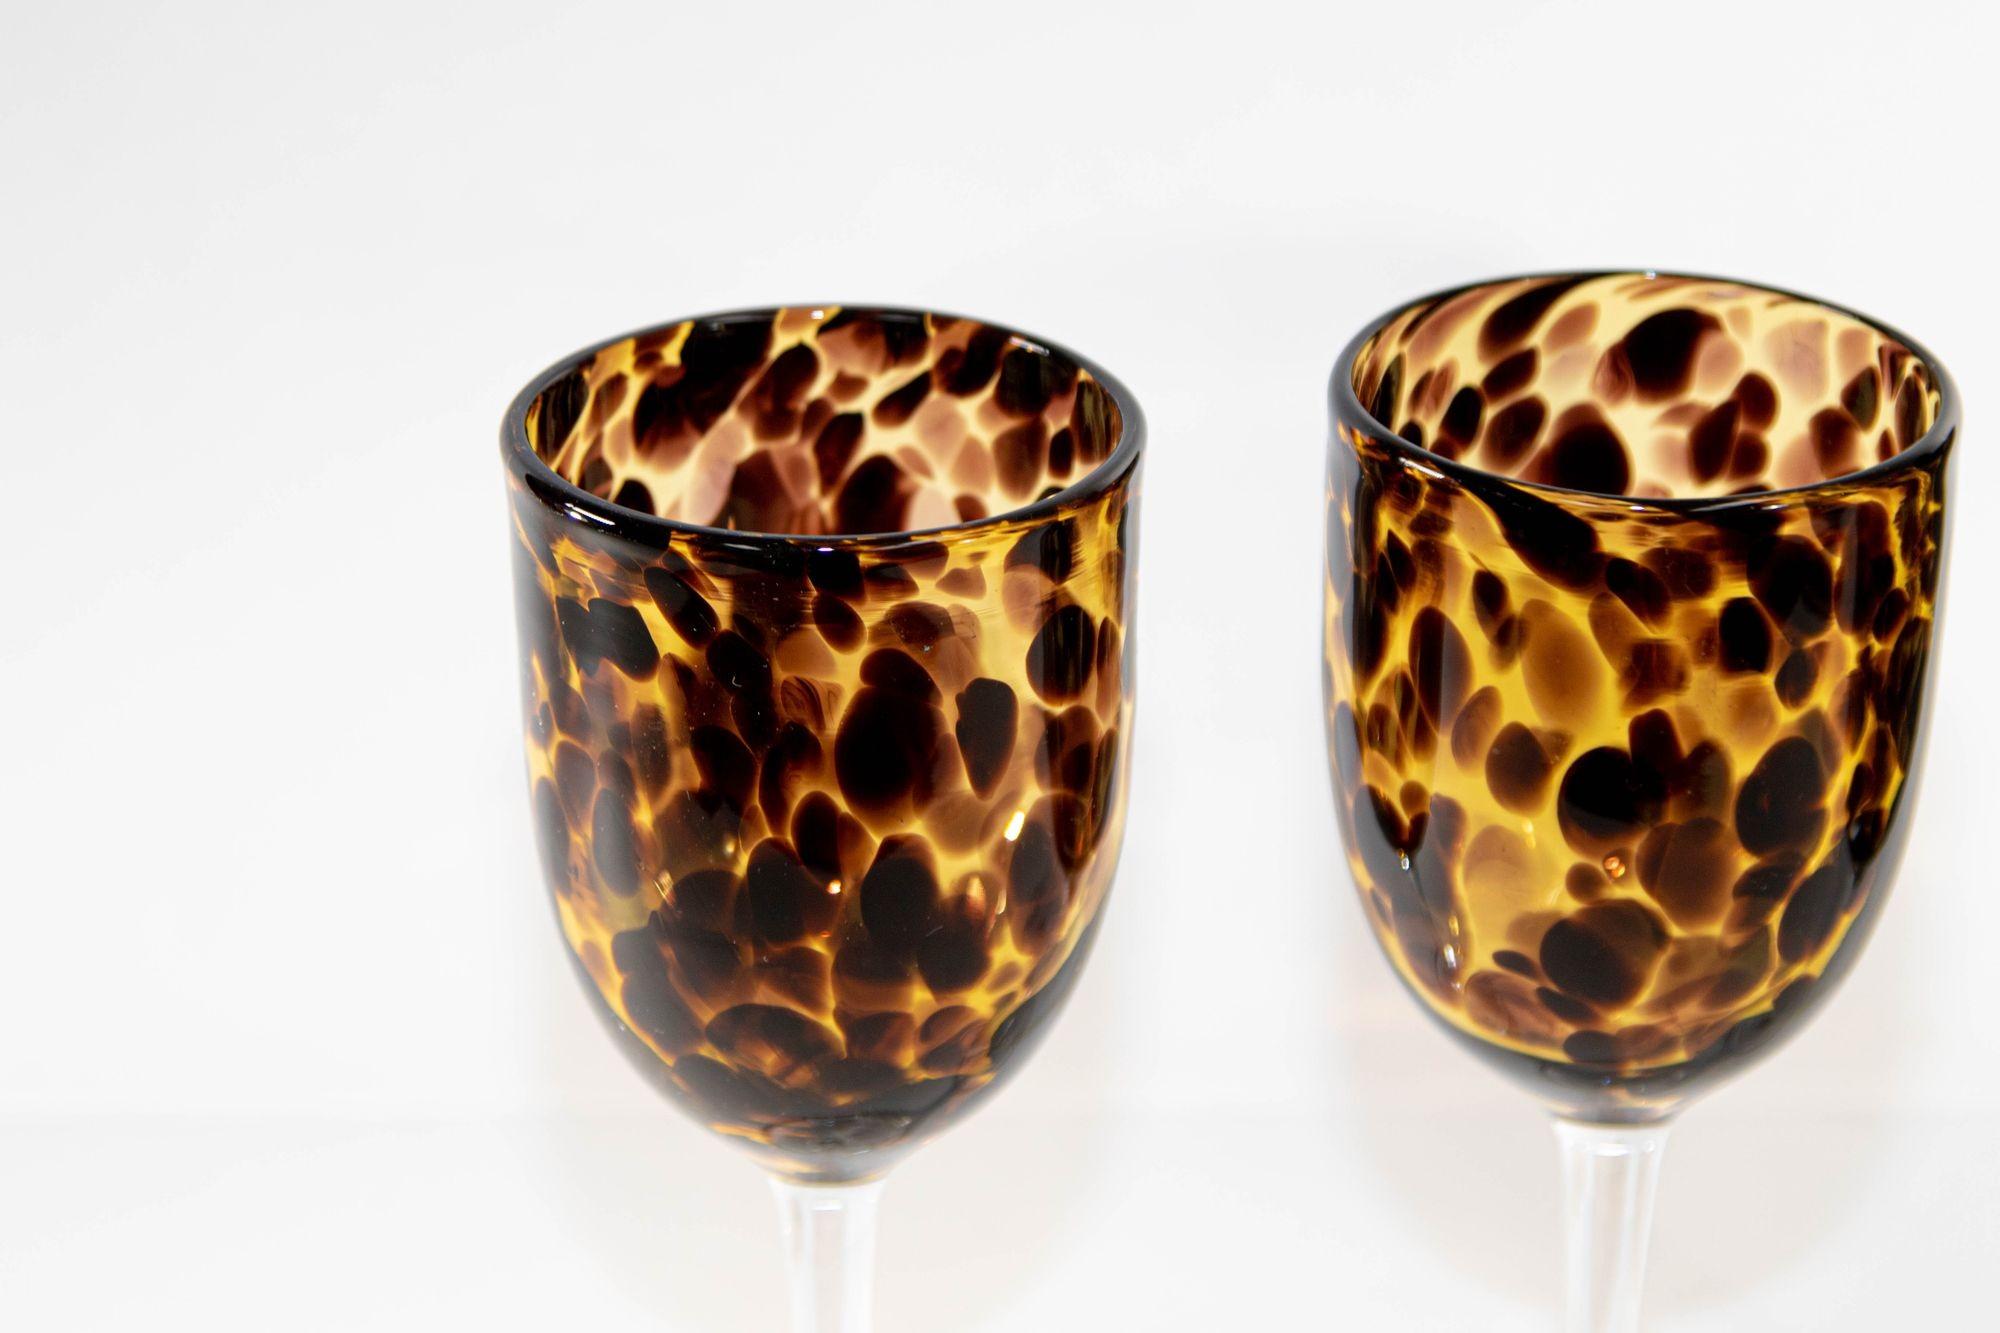 Vintage amber drinking footed glasses set of 3 mouth-blown with exclusive tortoiseshell color flowing pattern.
A distinctive tortoise shell motif brings rich color and dimension to a glass barware set that makes a stunning addition to your